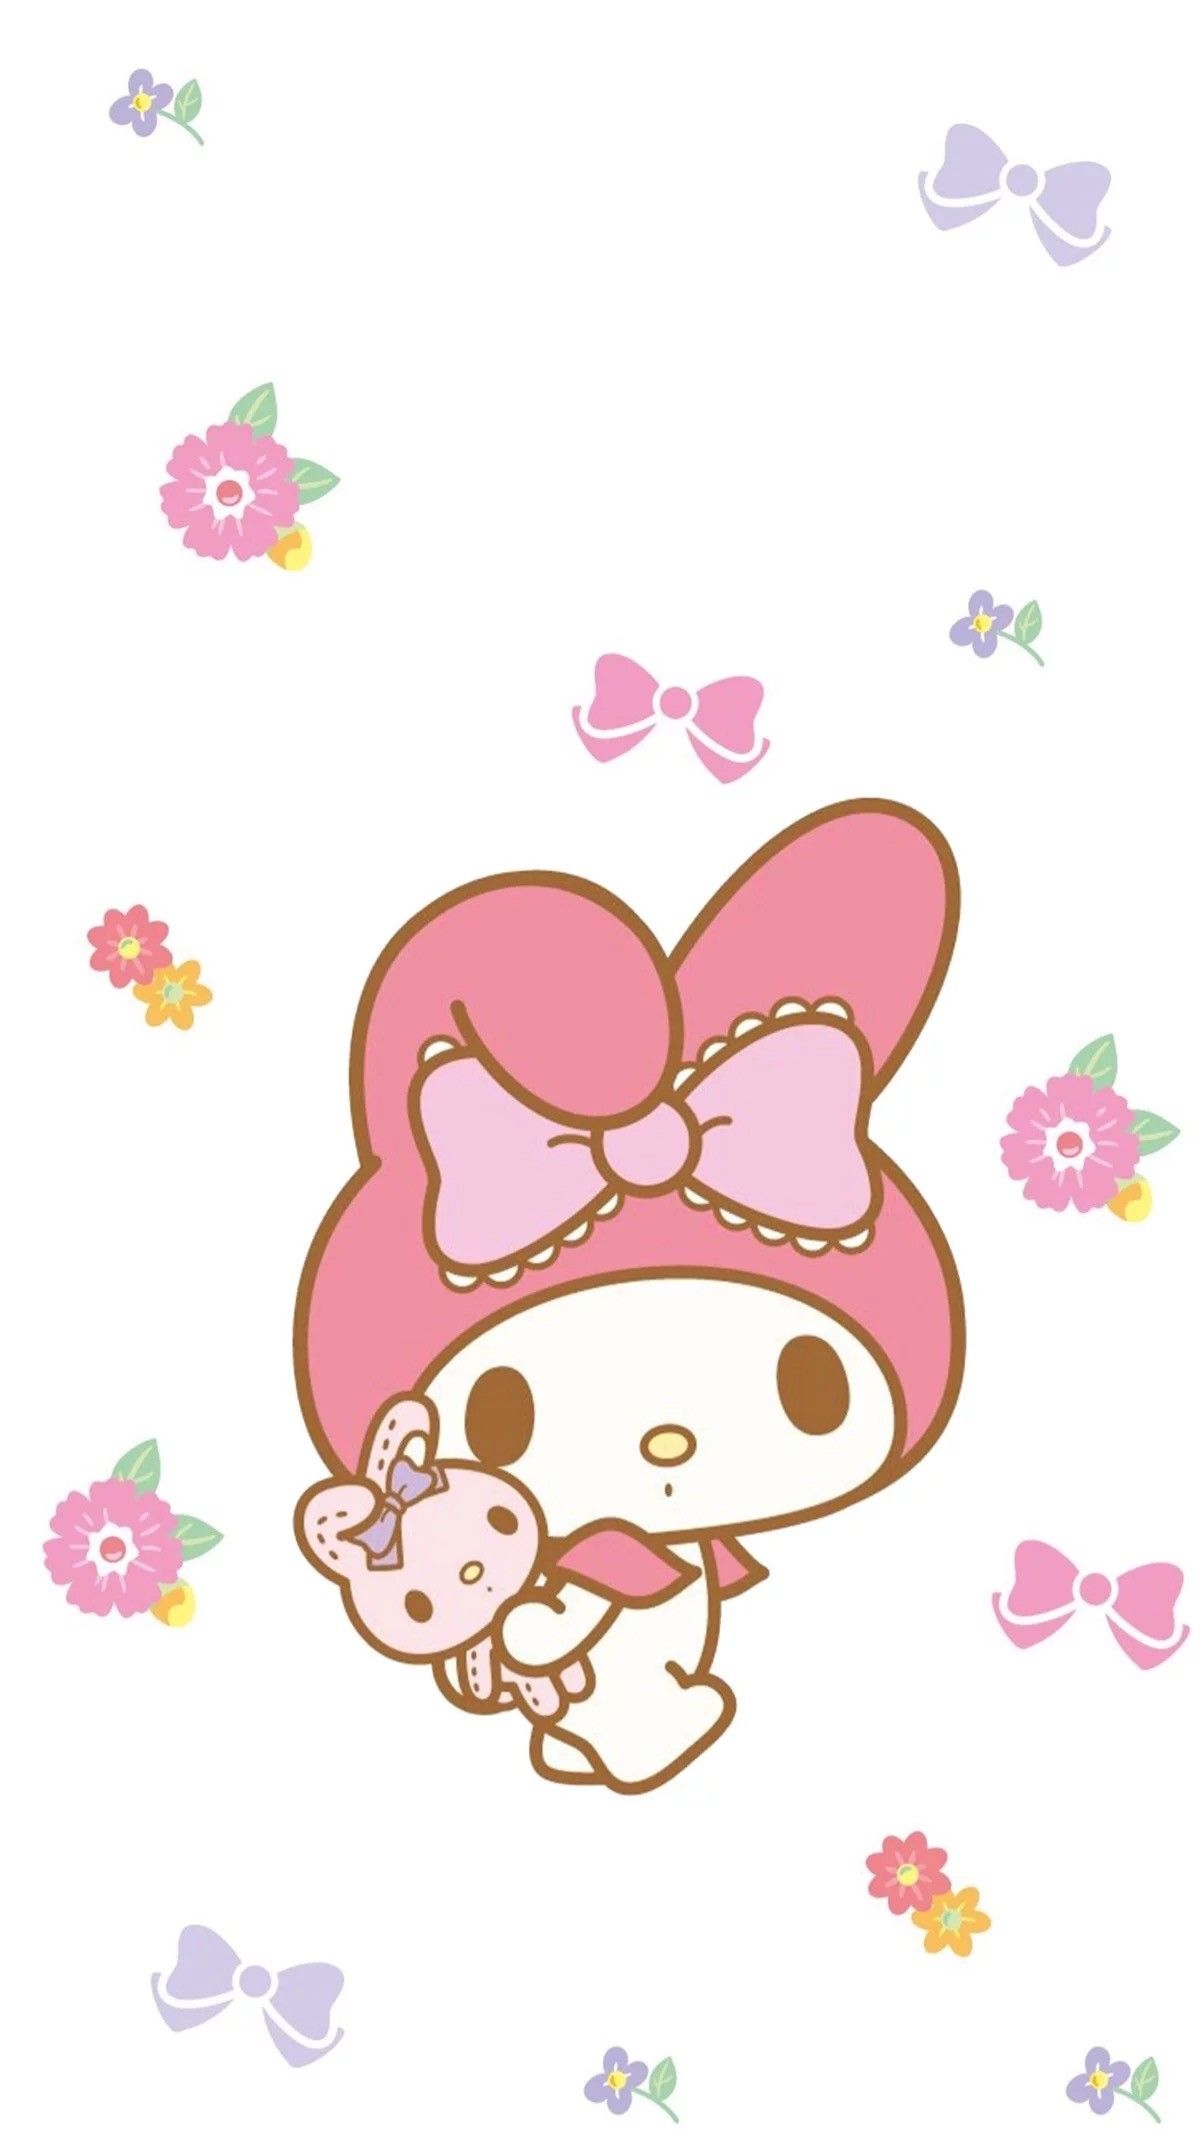 A cute little hello kitty with pink bow - Hello Kitty